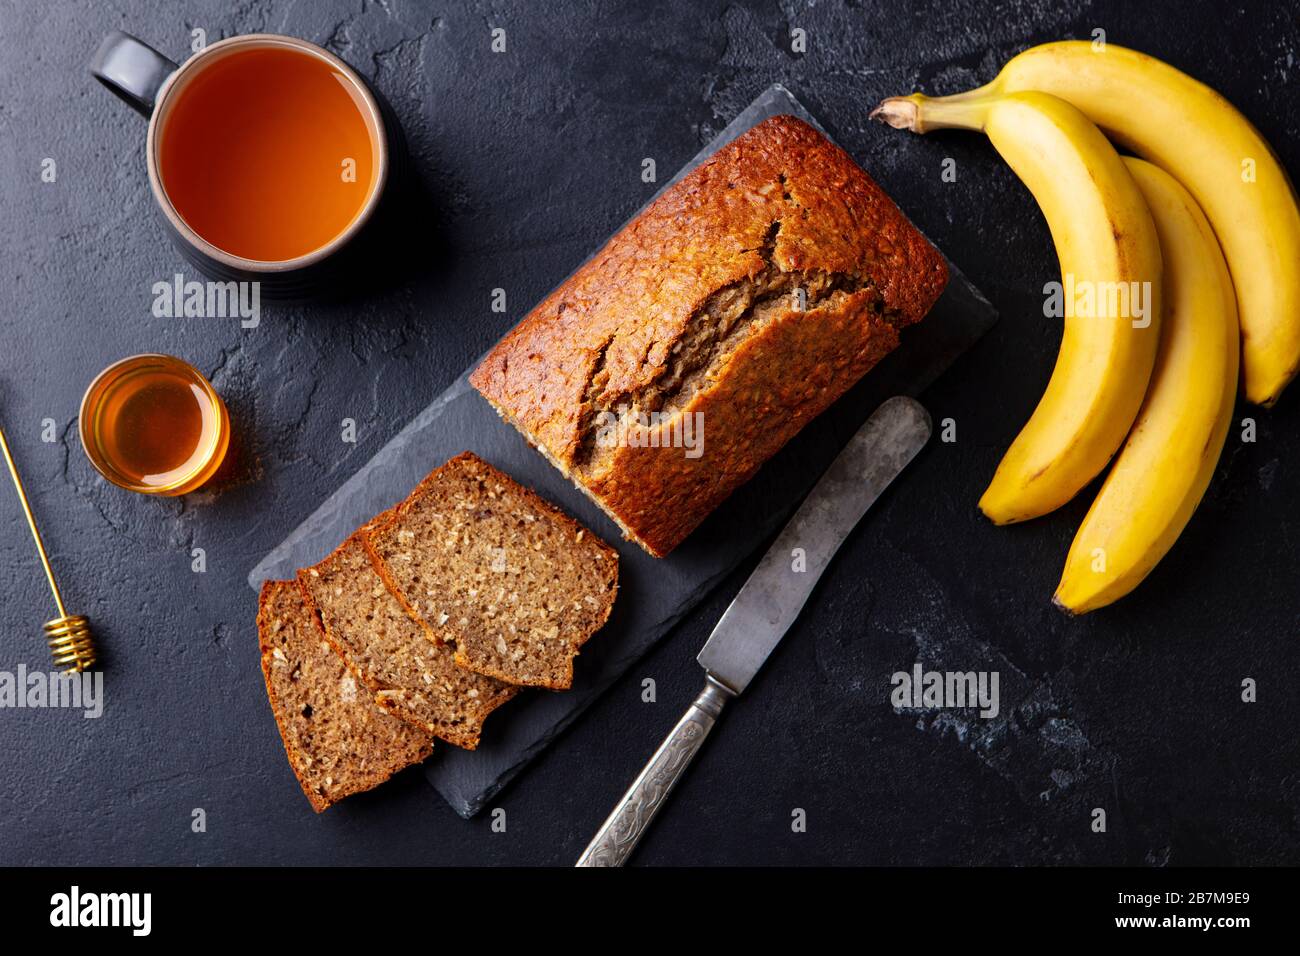 Banana, coconut bread, cake with cup of tea on slate board. Dark stone background. Copy space. Top view. Stock Photo